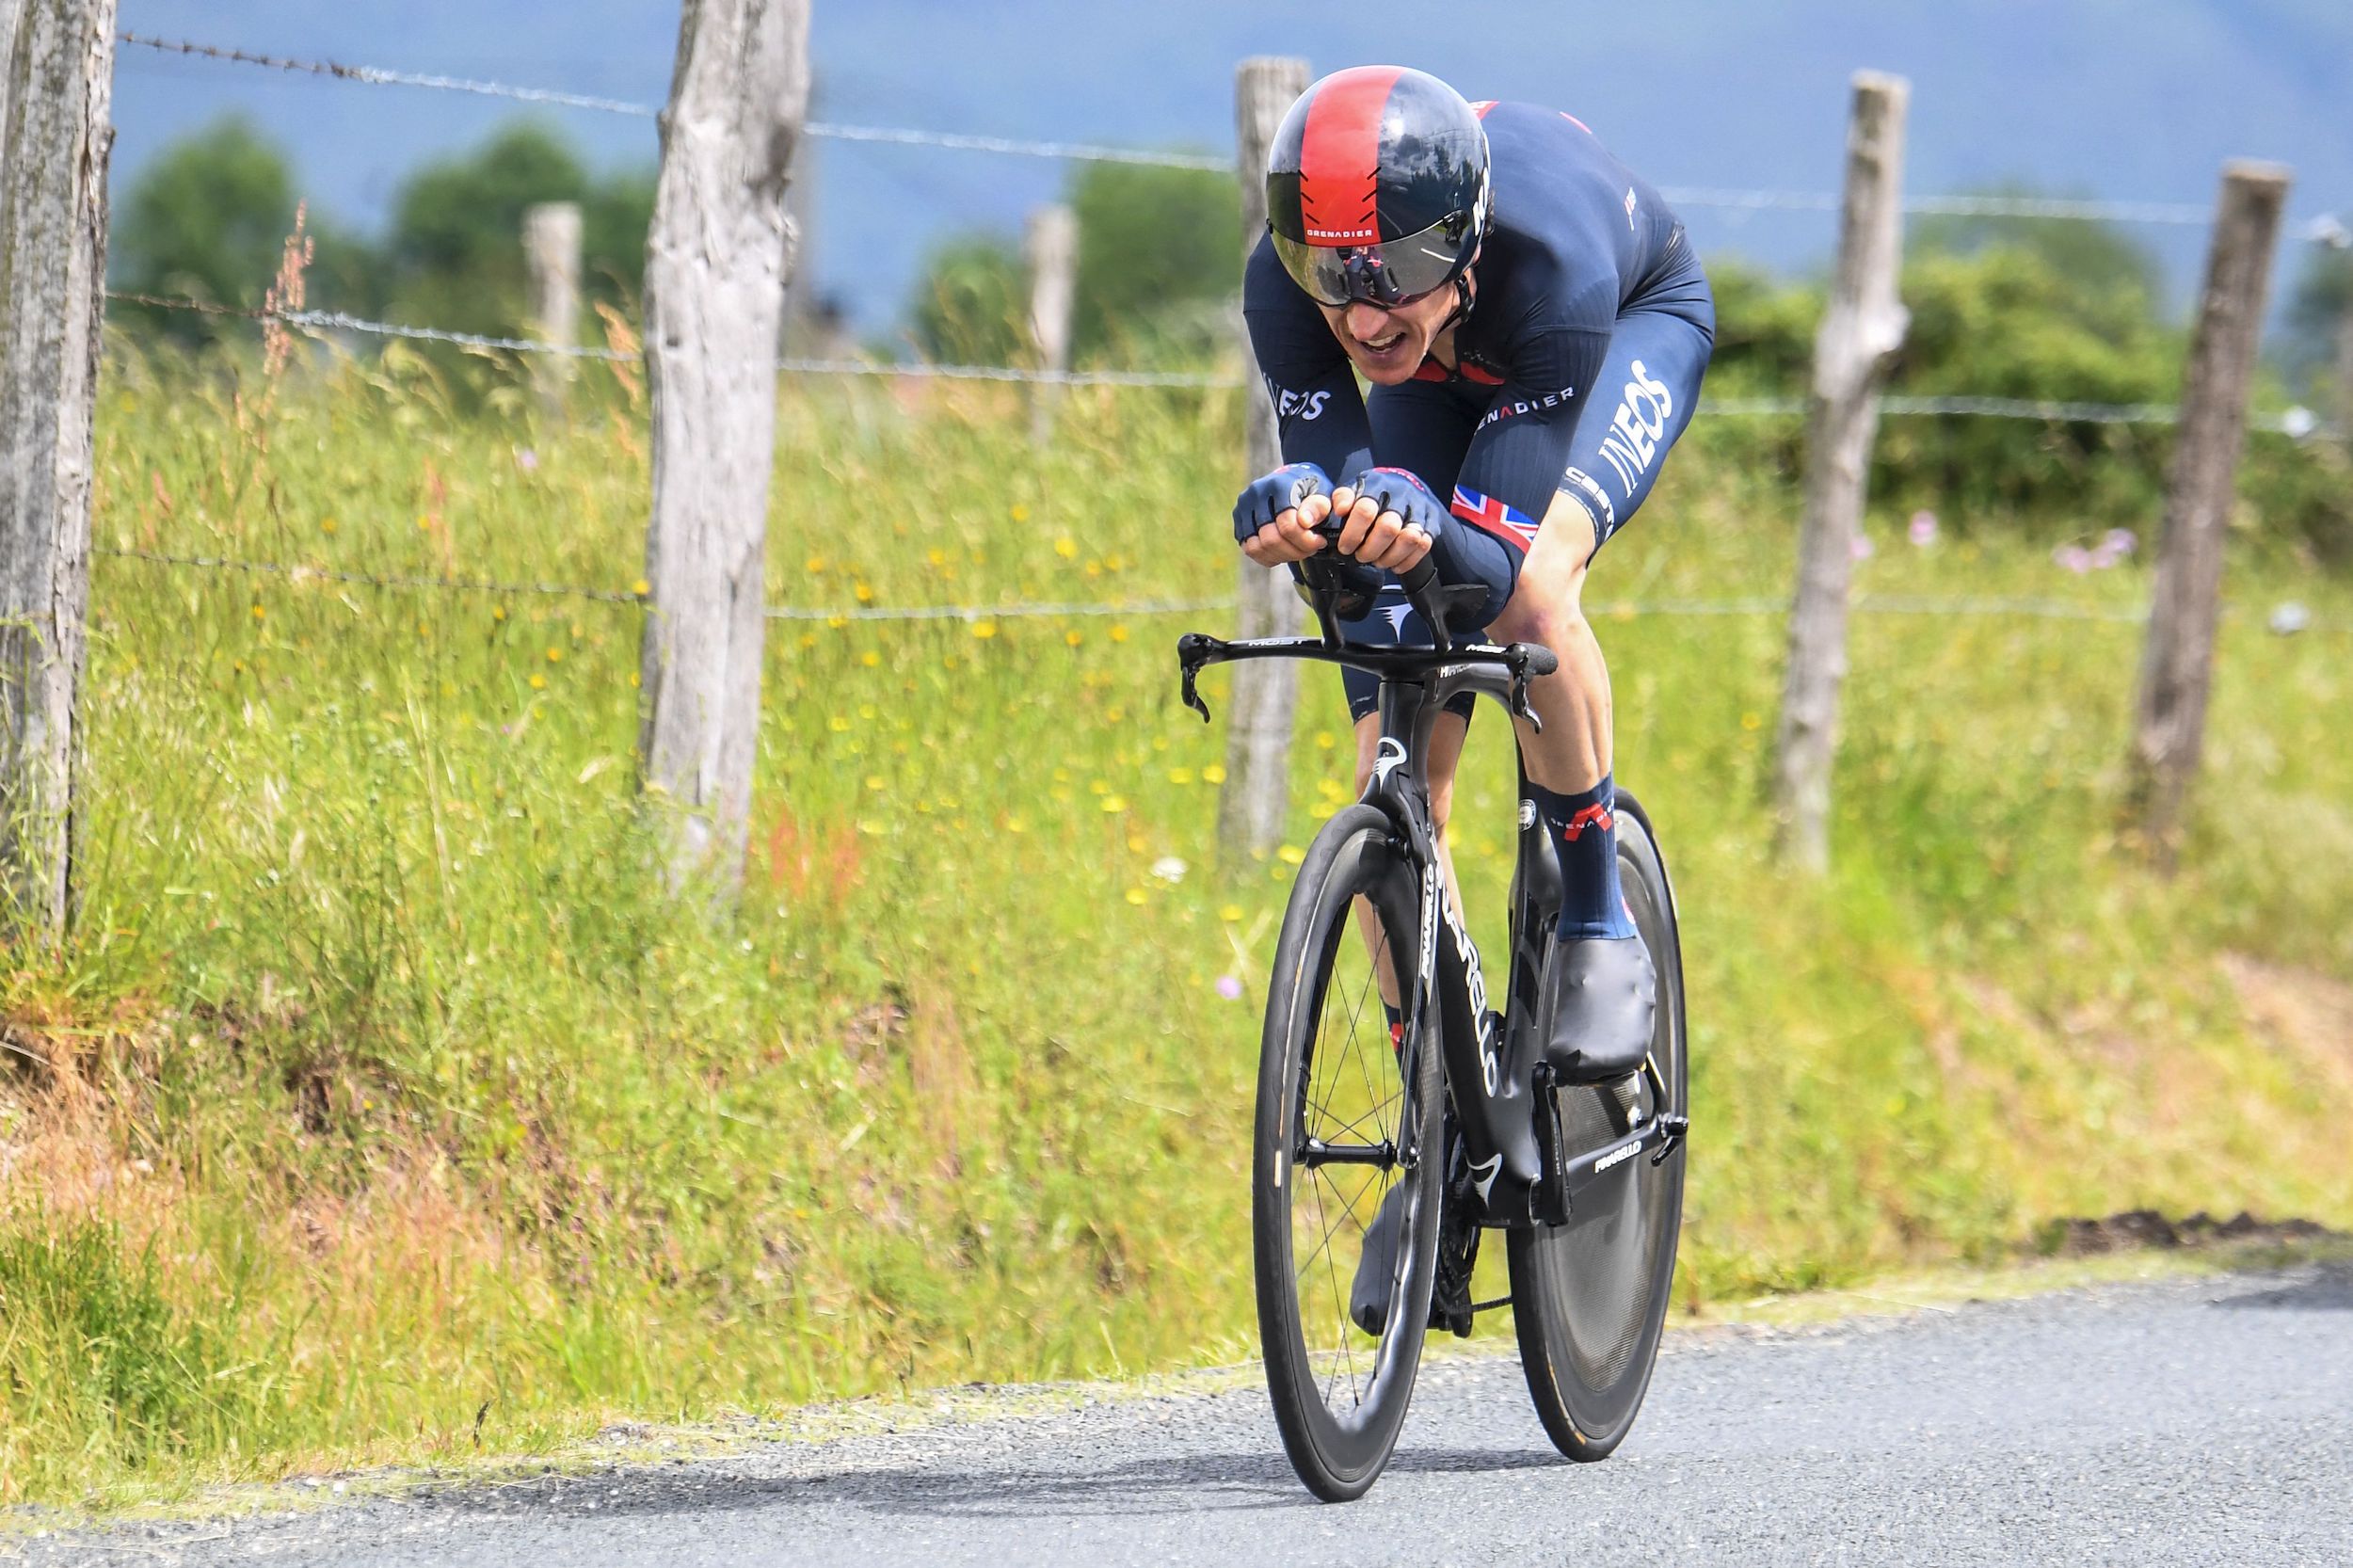 Tour de France: Start times for crucial stage five time trial | Cycling ...